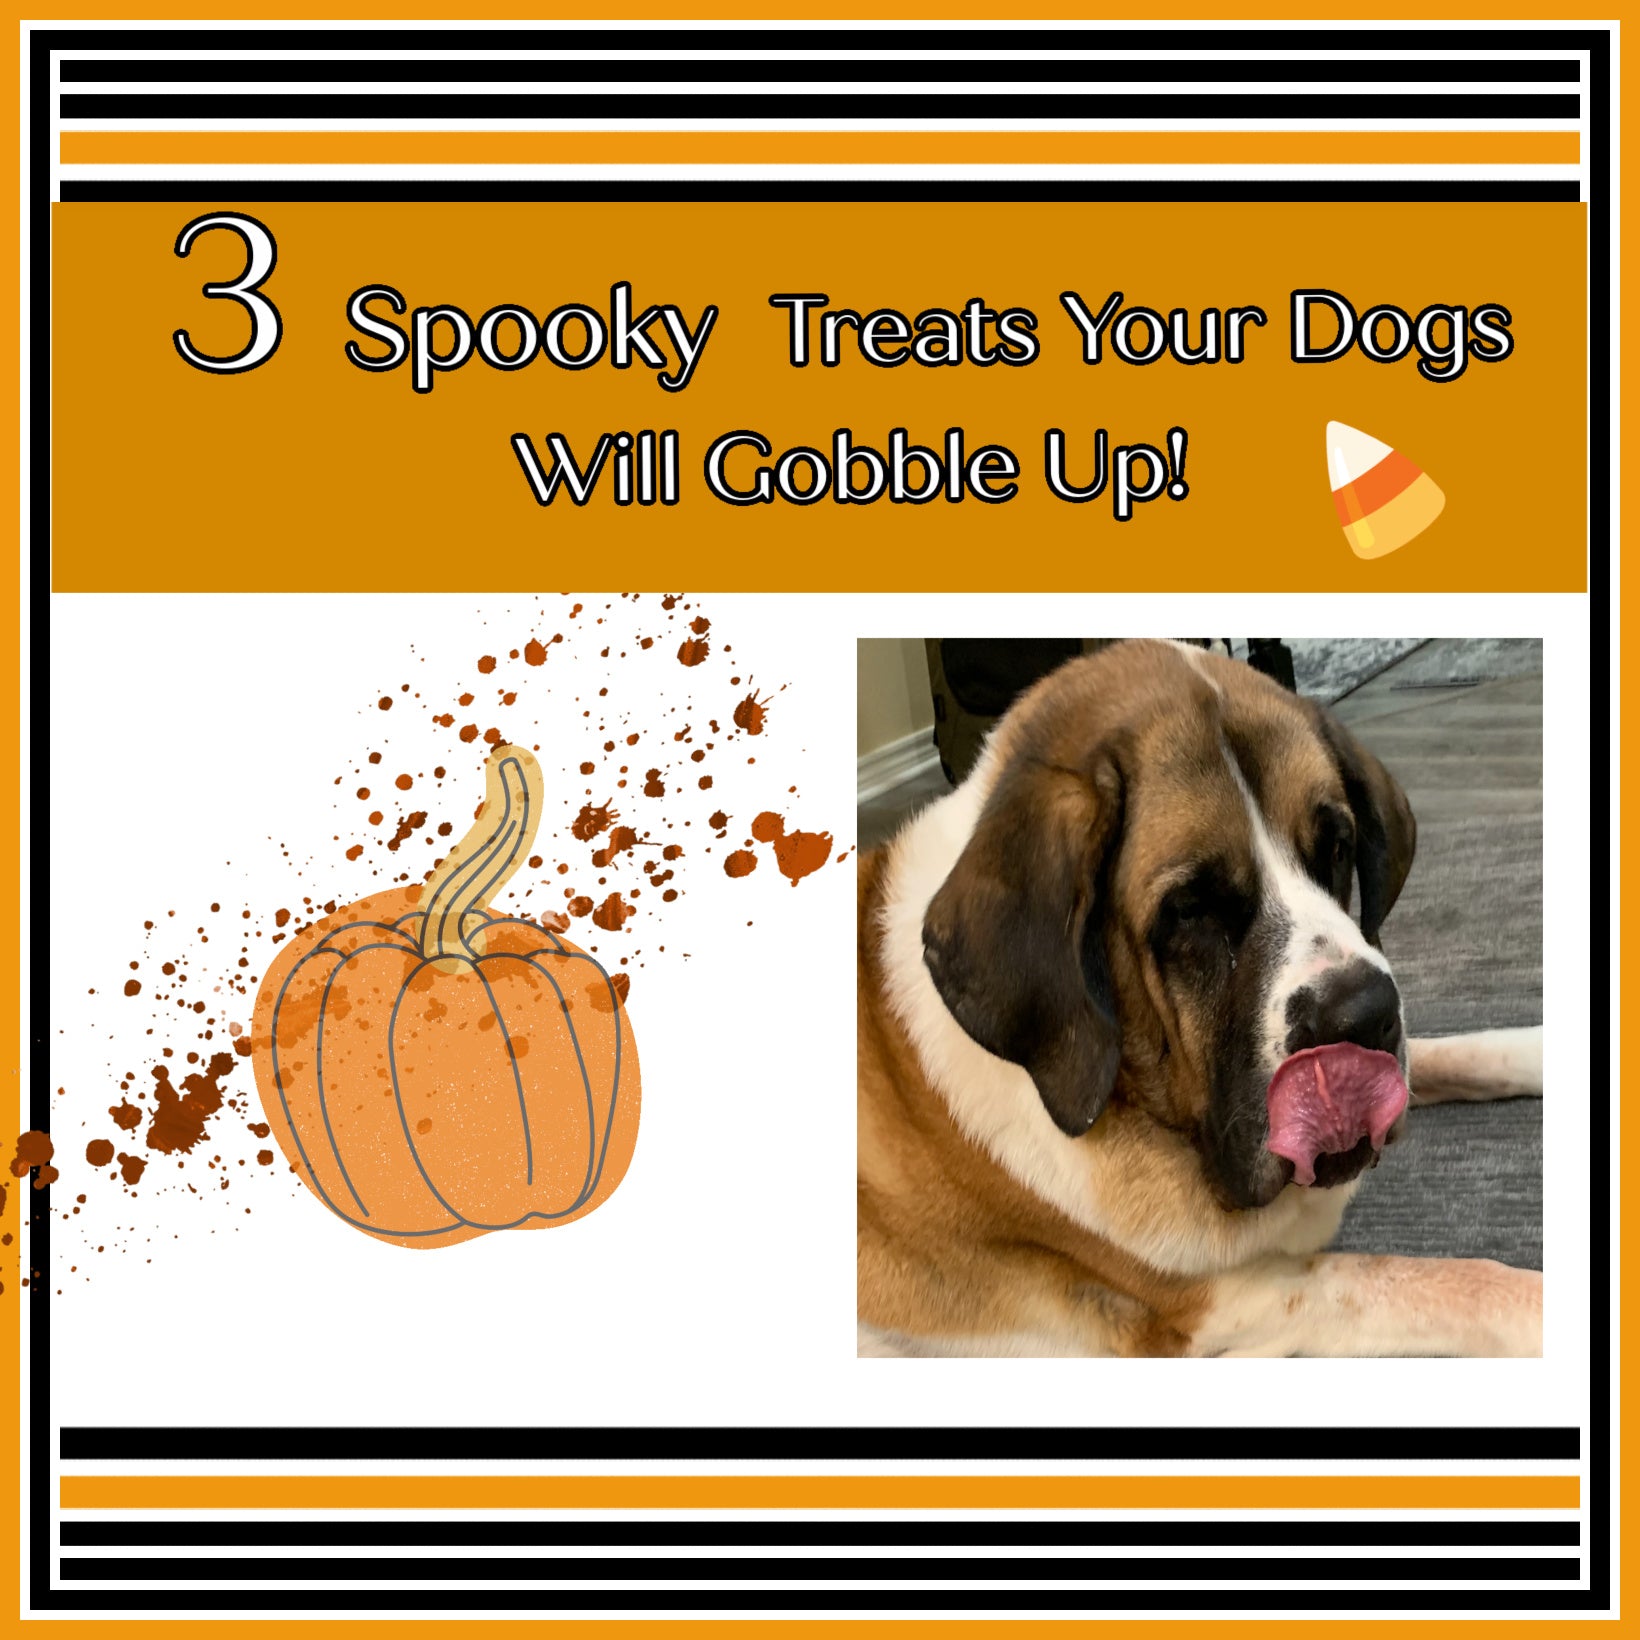 3 Spooky Treats Your Dogs Will Gobble Up!